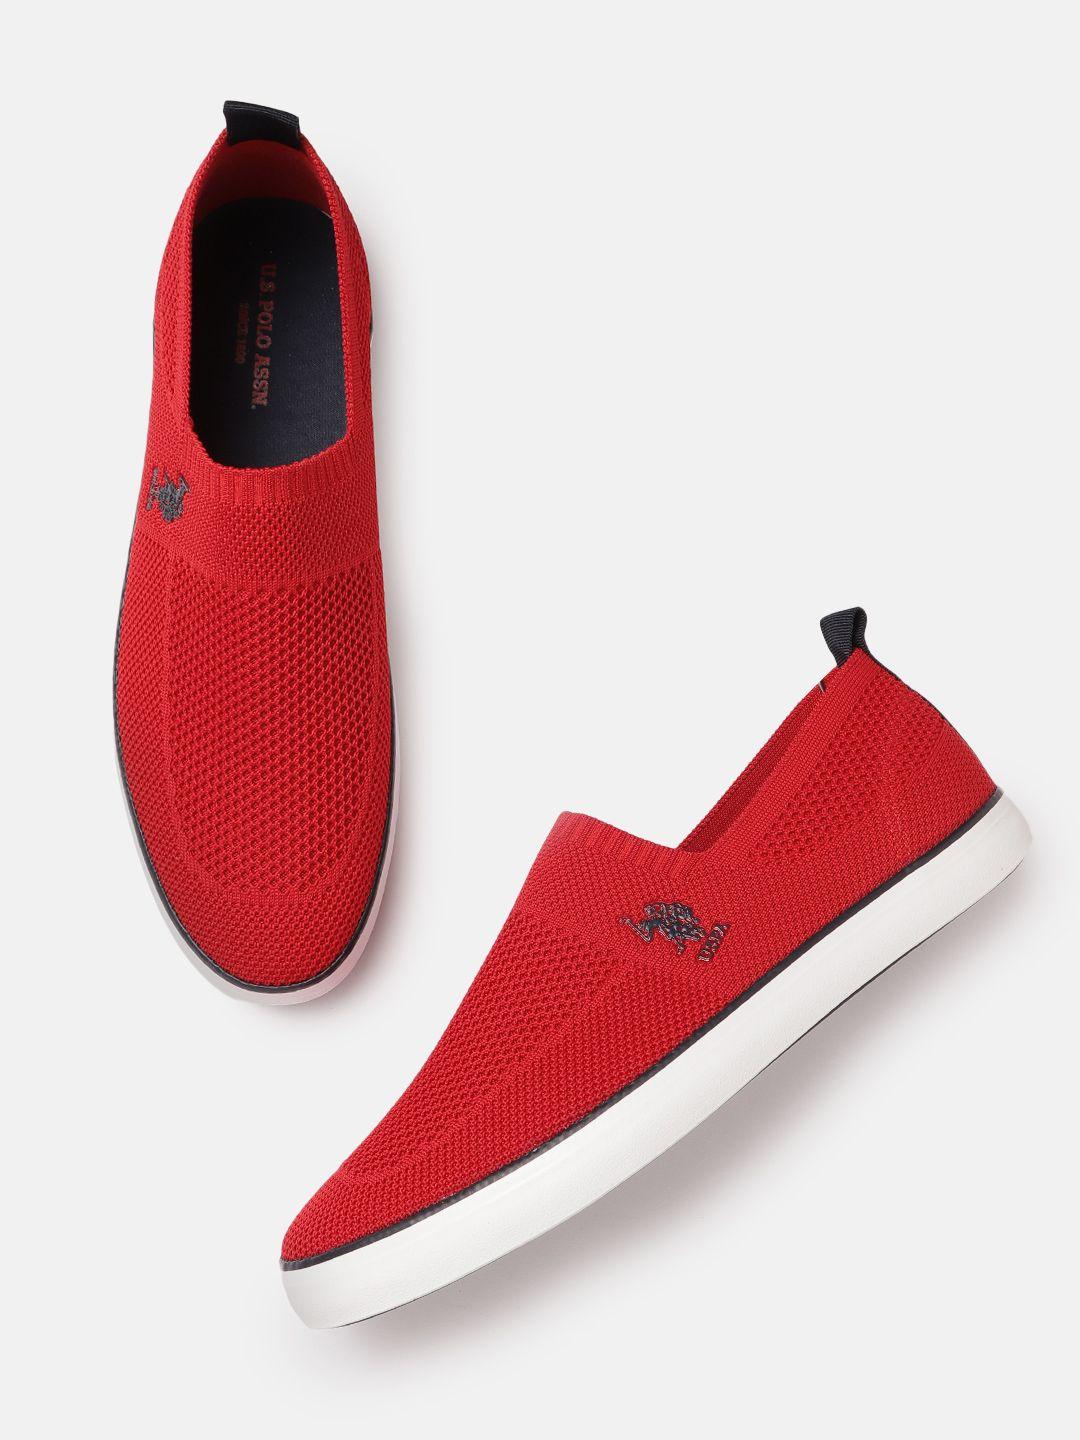 u-s-polo-assn-men-red-solid-brand-logo-slip-on-sneakers